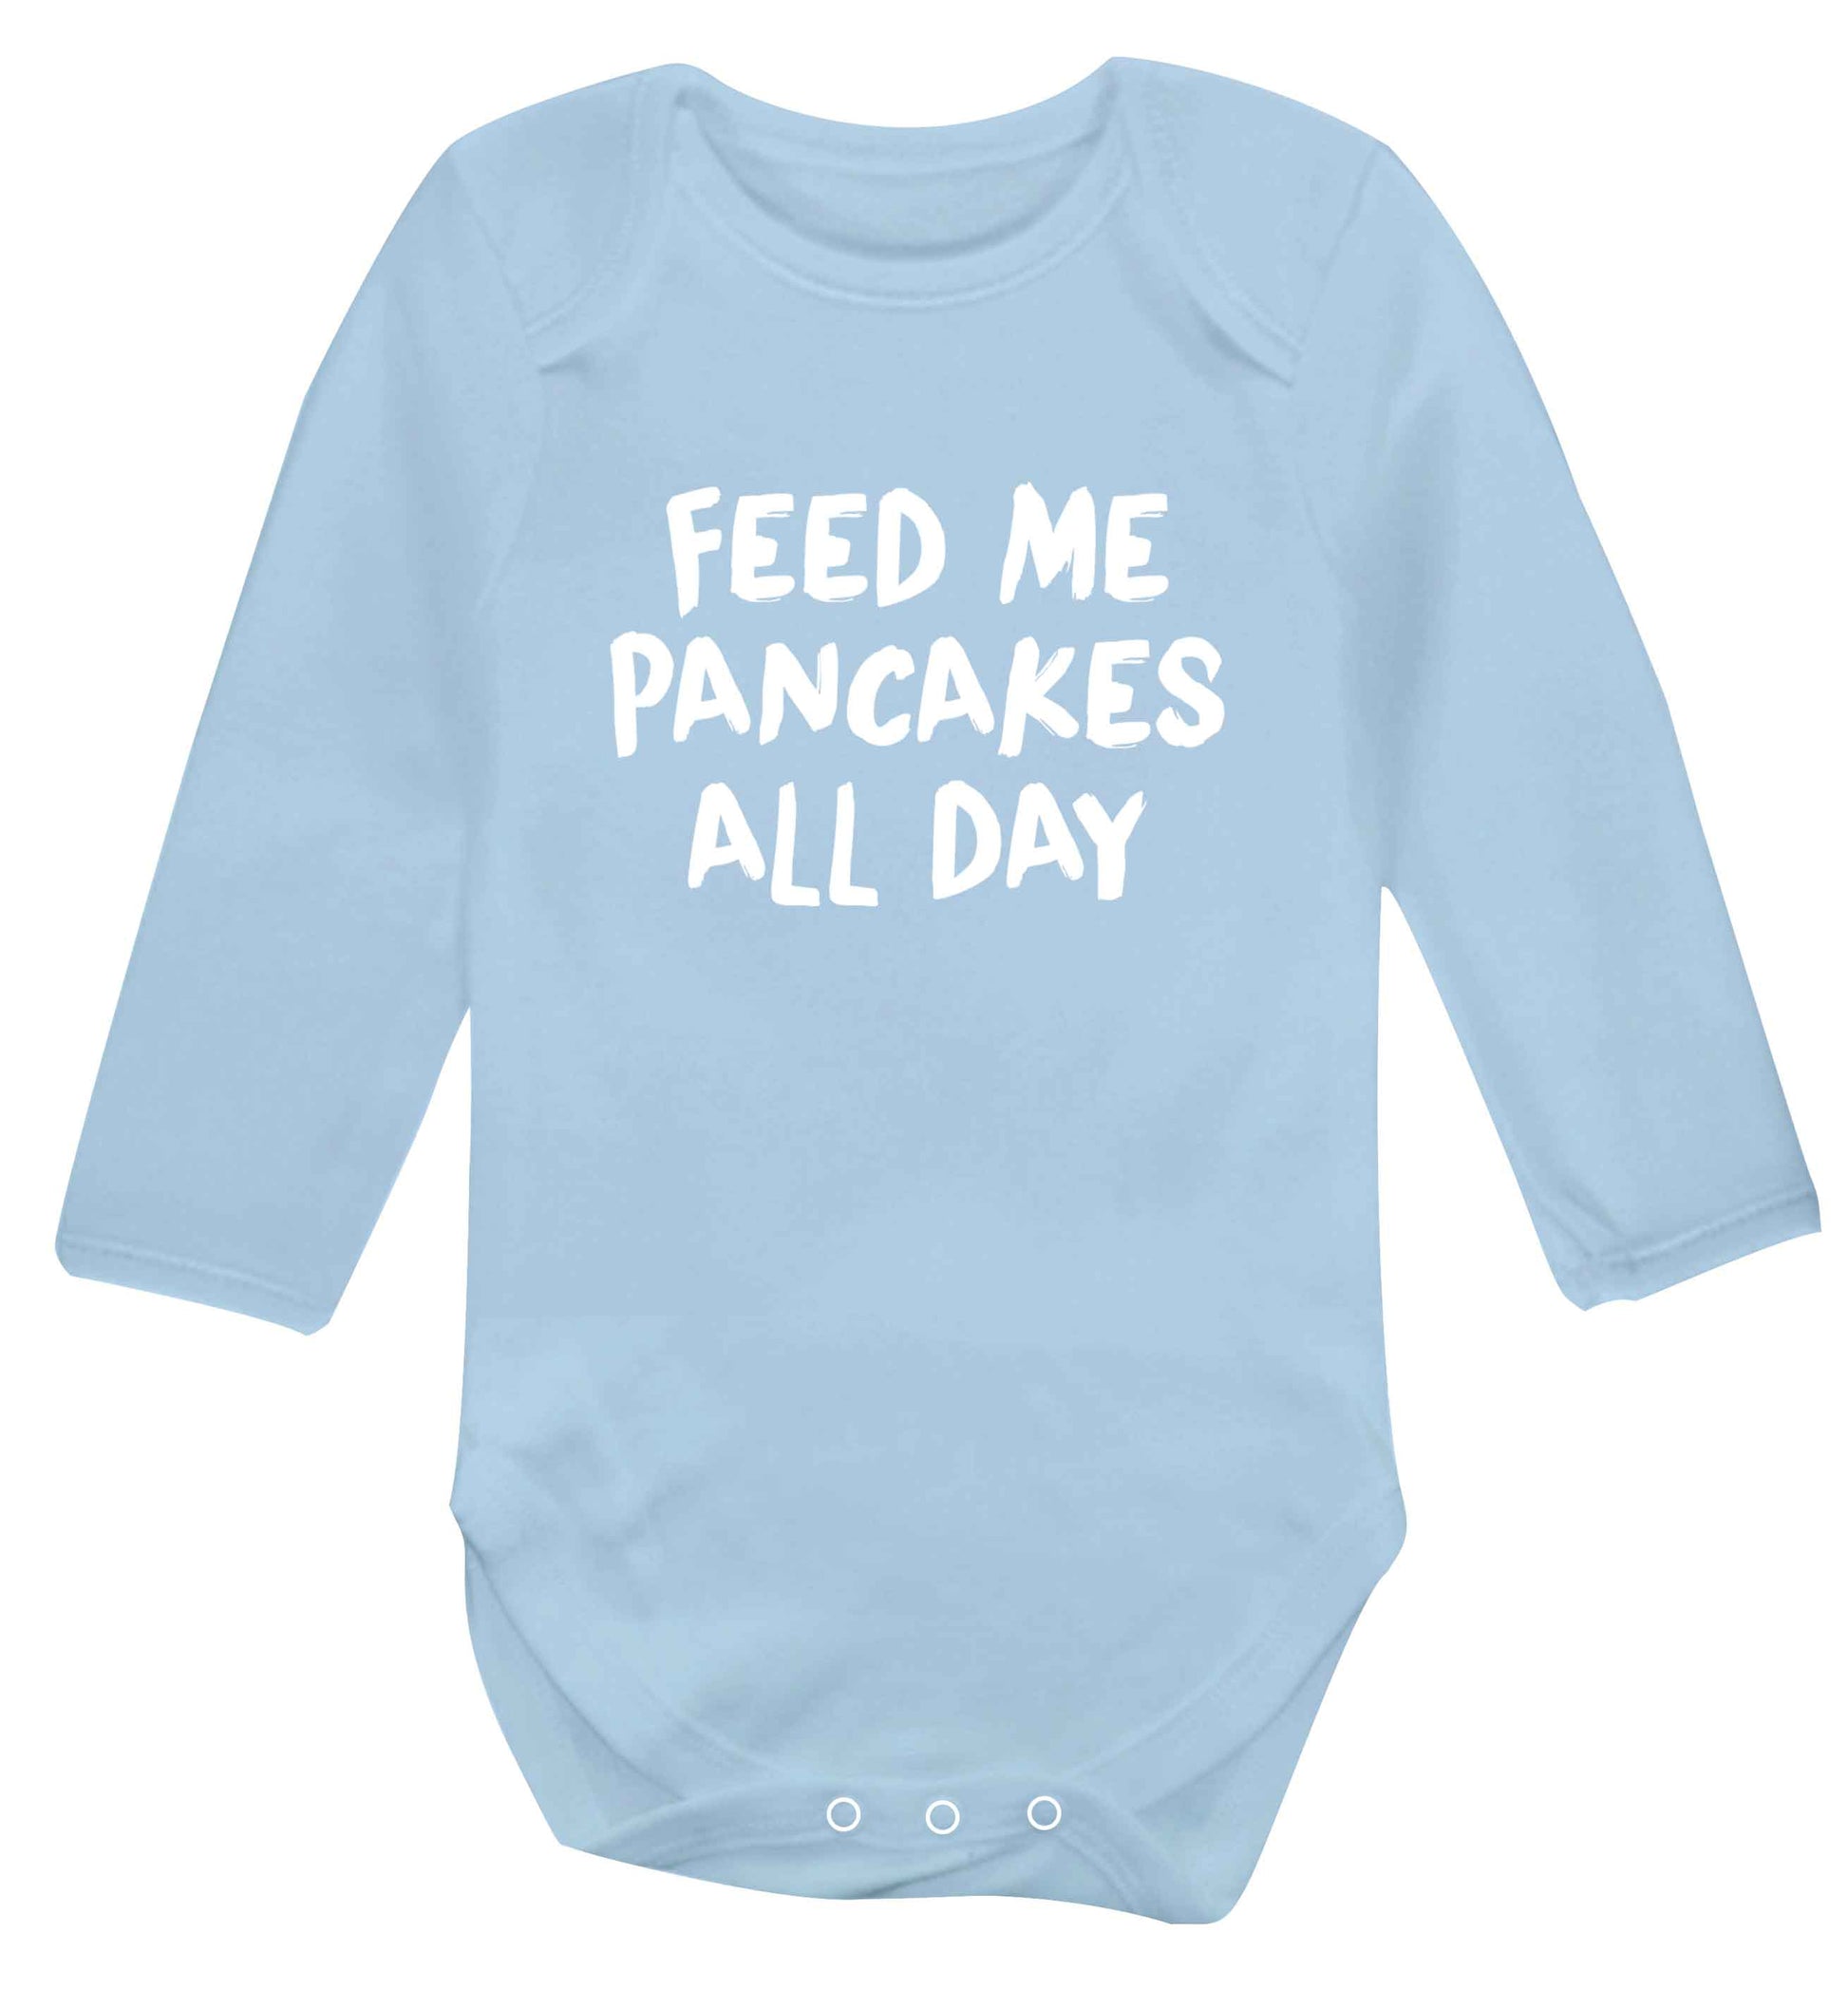 Feed me pancakes all day baby vest long sleeved pale blue 6-12 months